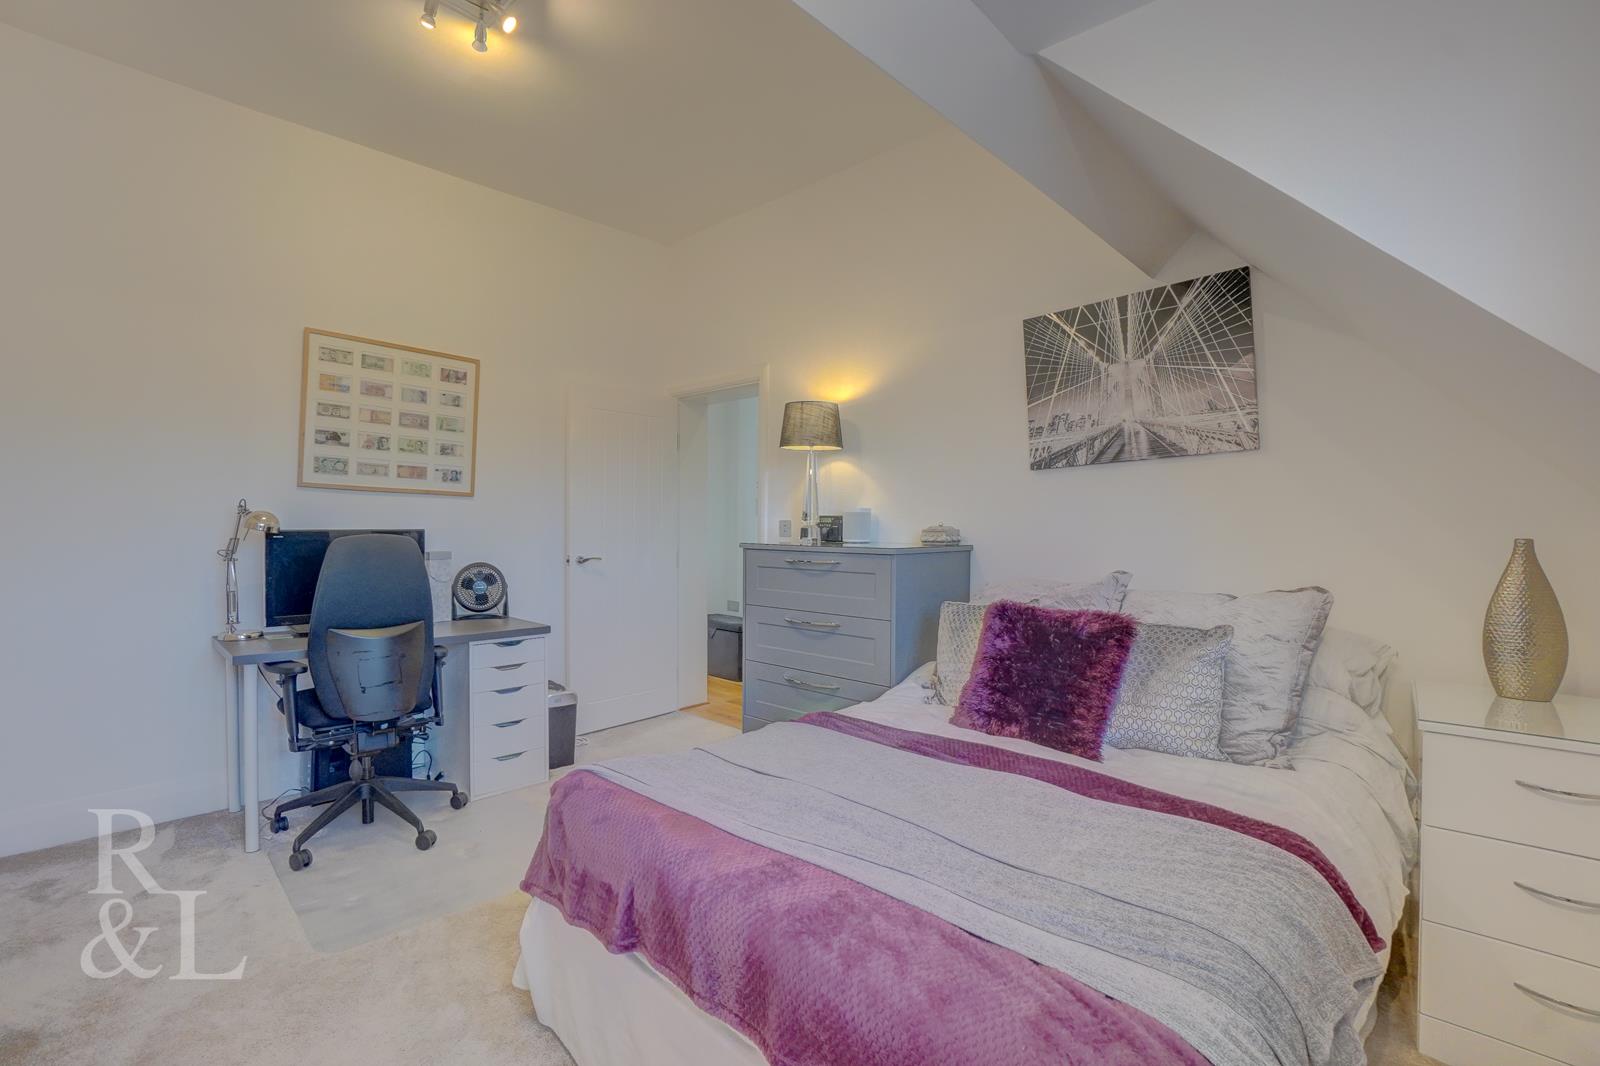 Property image for Dorothy Boot Homes, Wilford, Nottingham